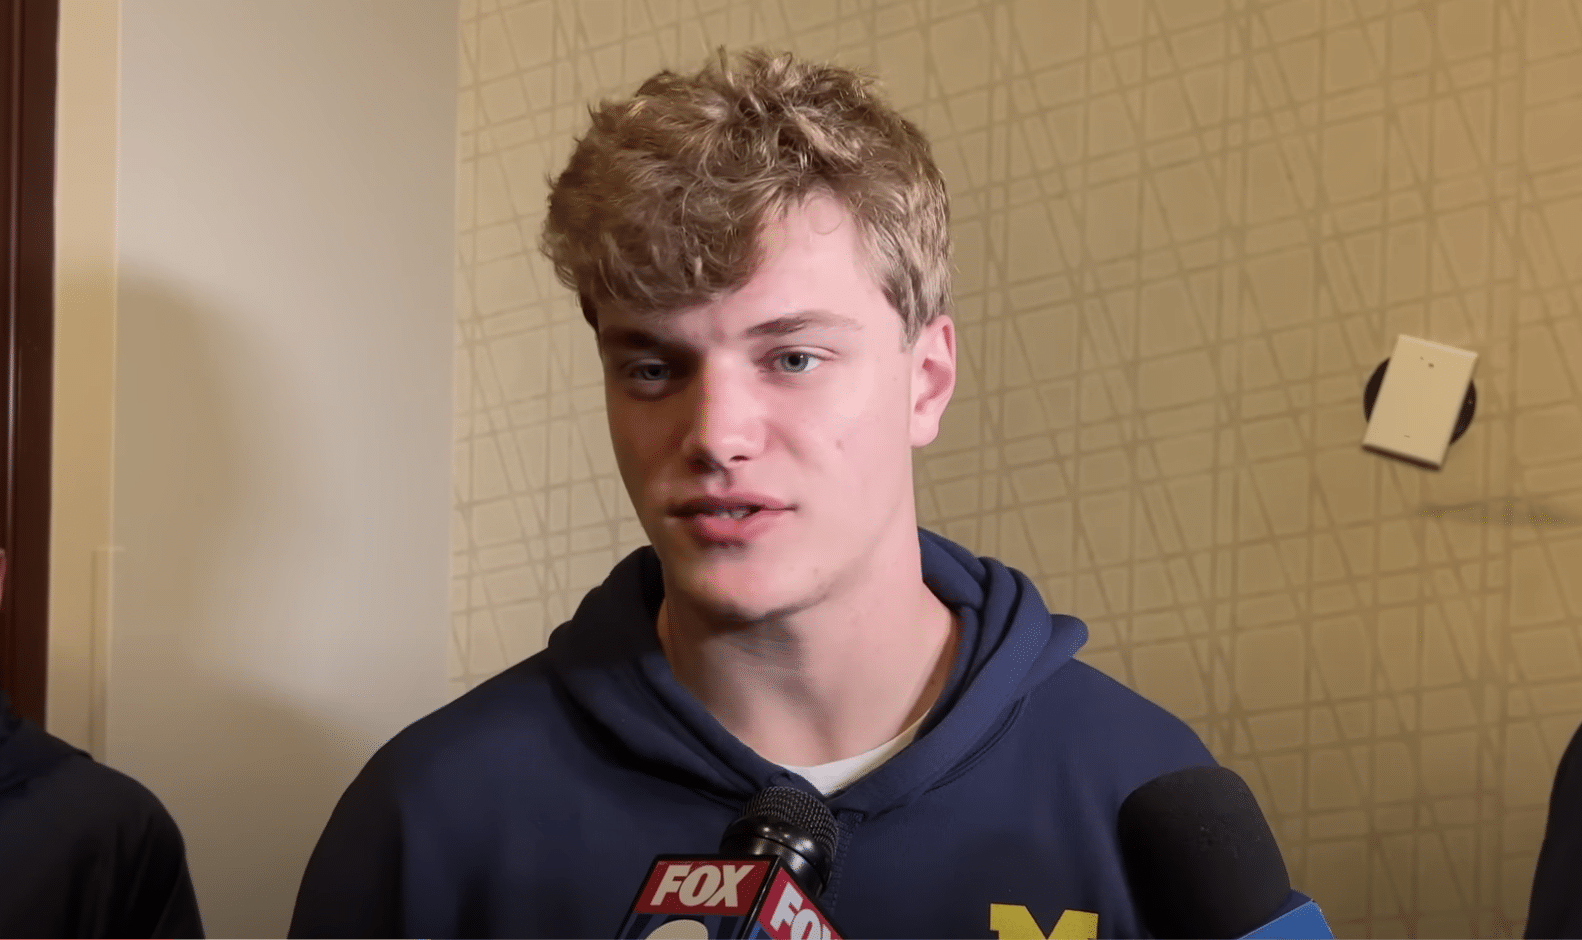 J.J. McCarthy once rooted for Ohio State What is J.J. McCarthy's NIL valuation Michigan Football Players Reveal J.J. McCarthy won't touch a rose